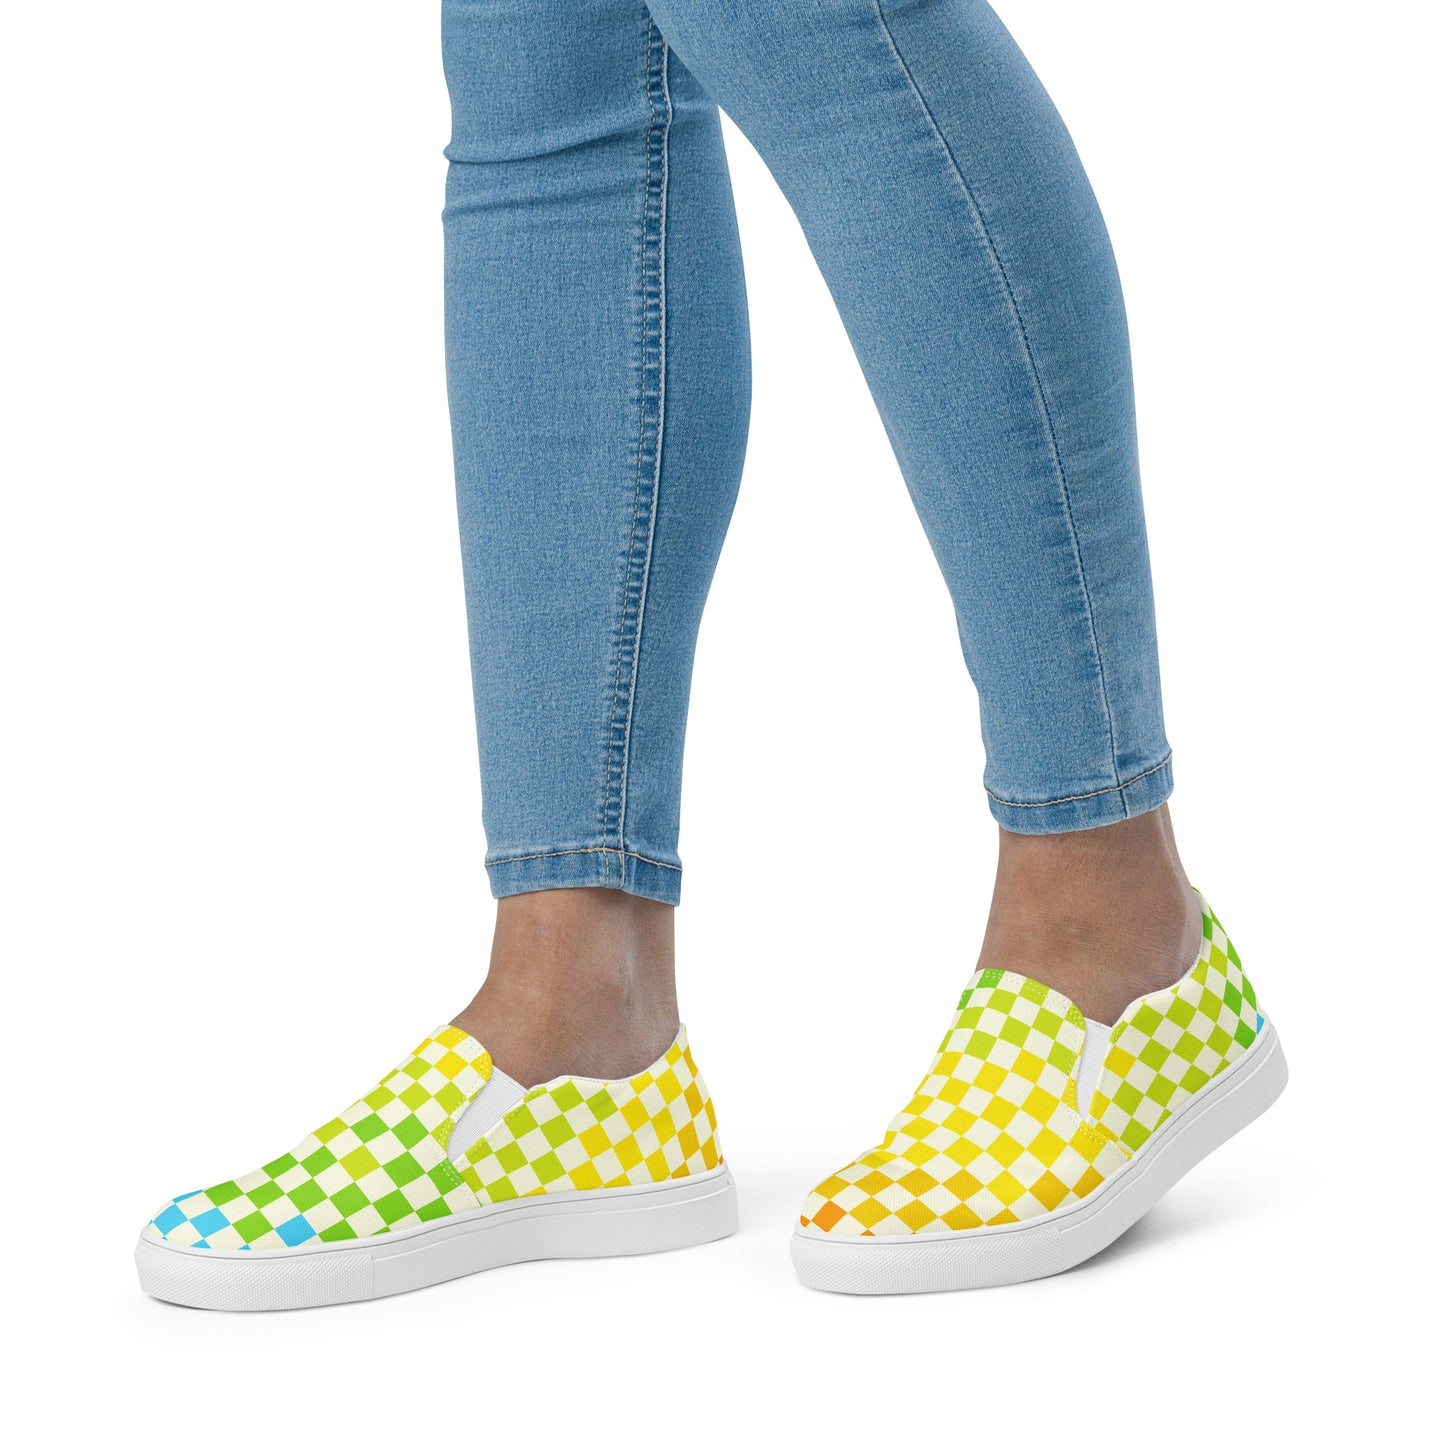 Warm & Cool Check Women’s slip-on canvas shoes